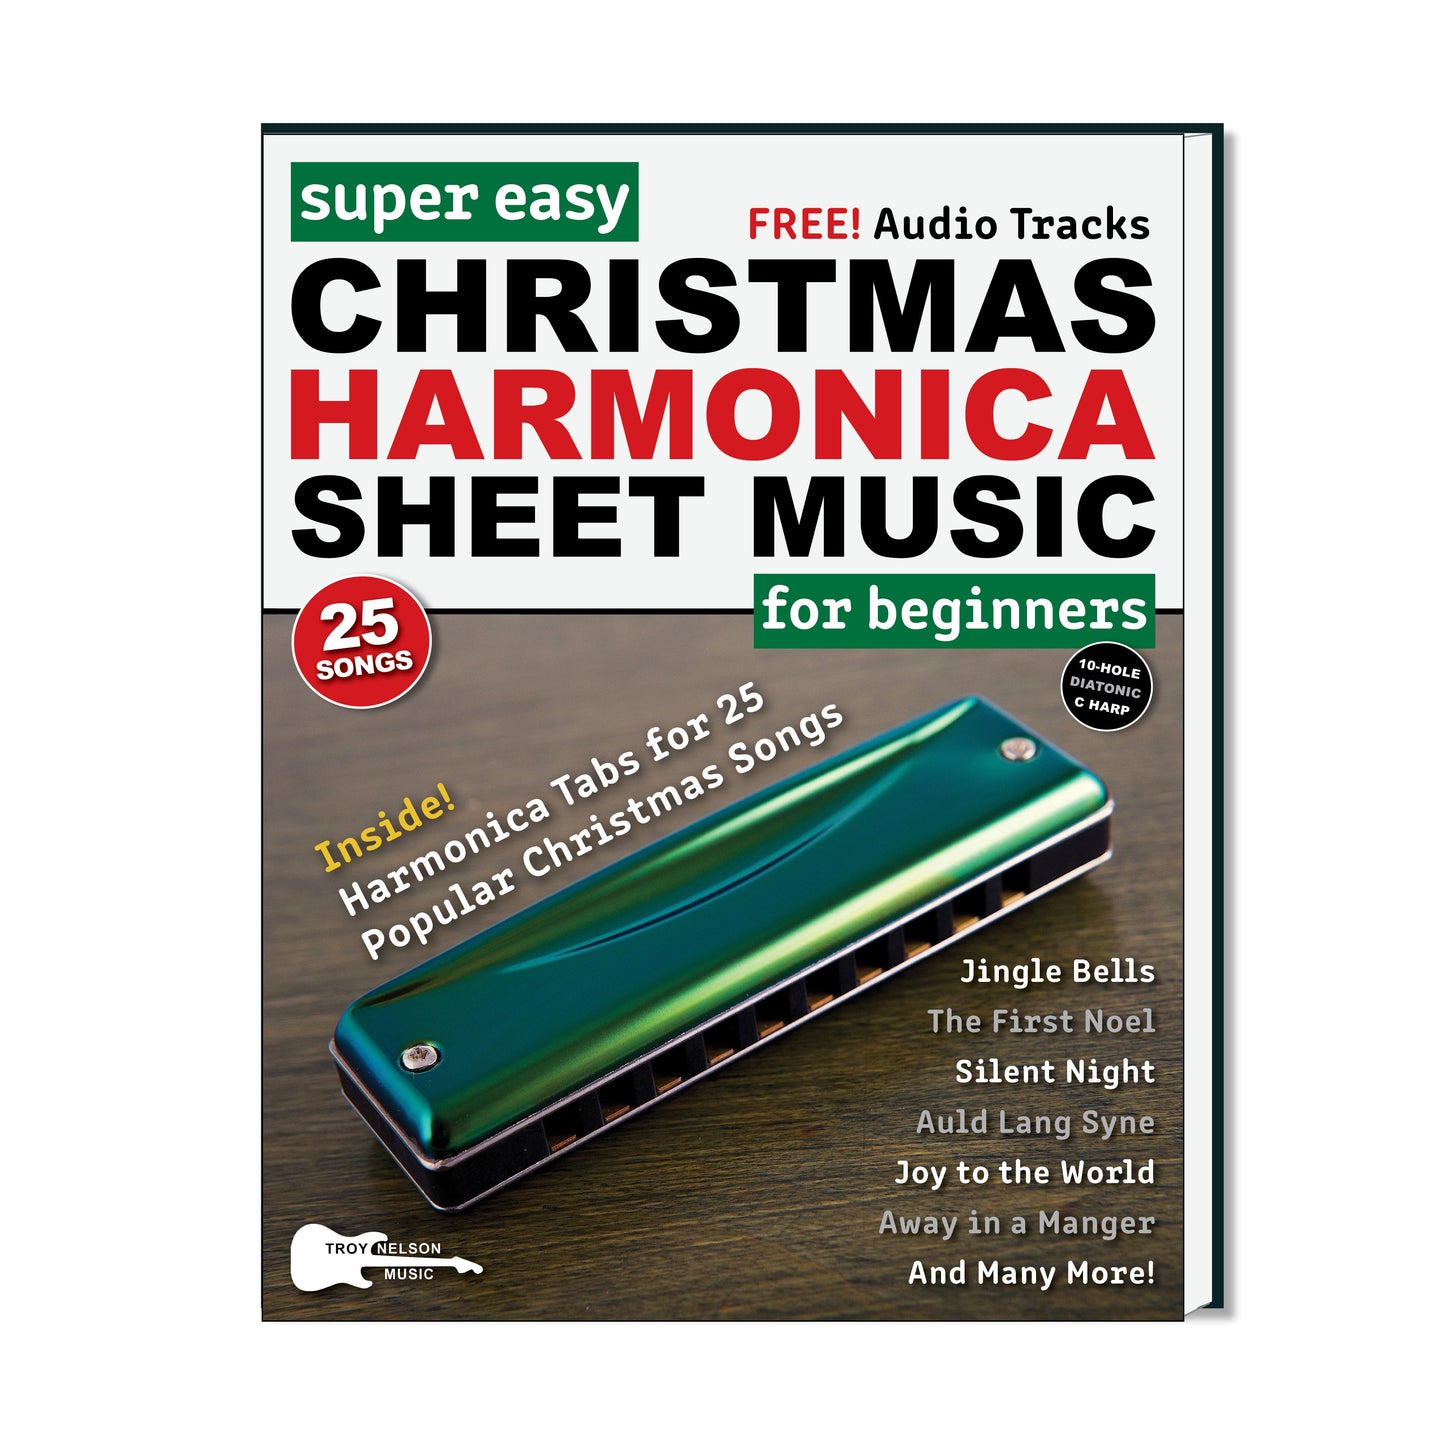 Image of Harmonica with Christmas Decorations on a Book Cover